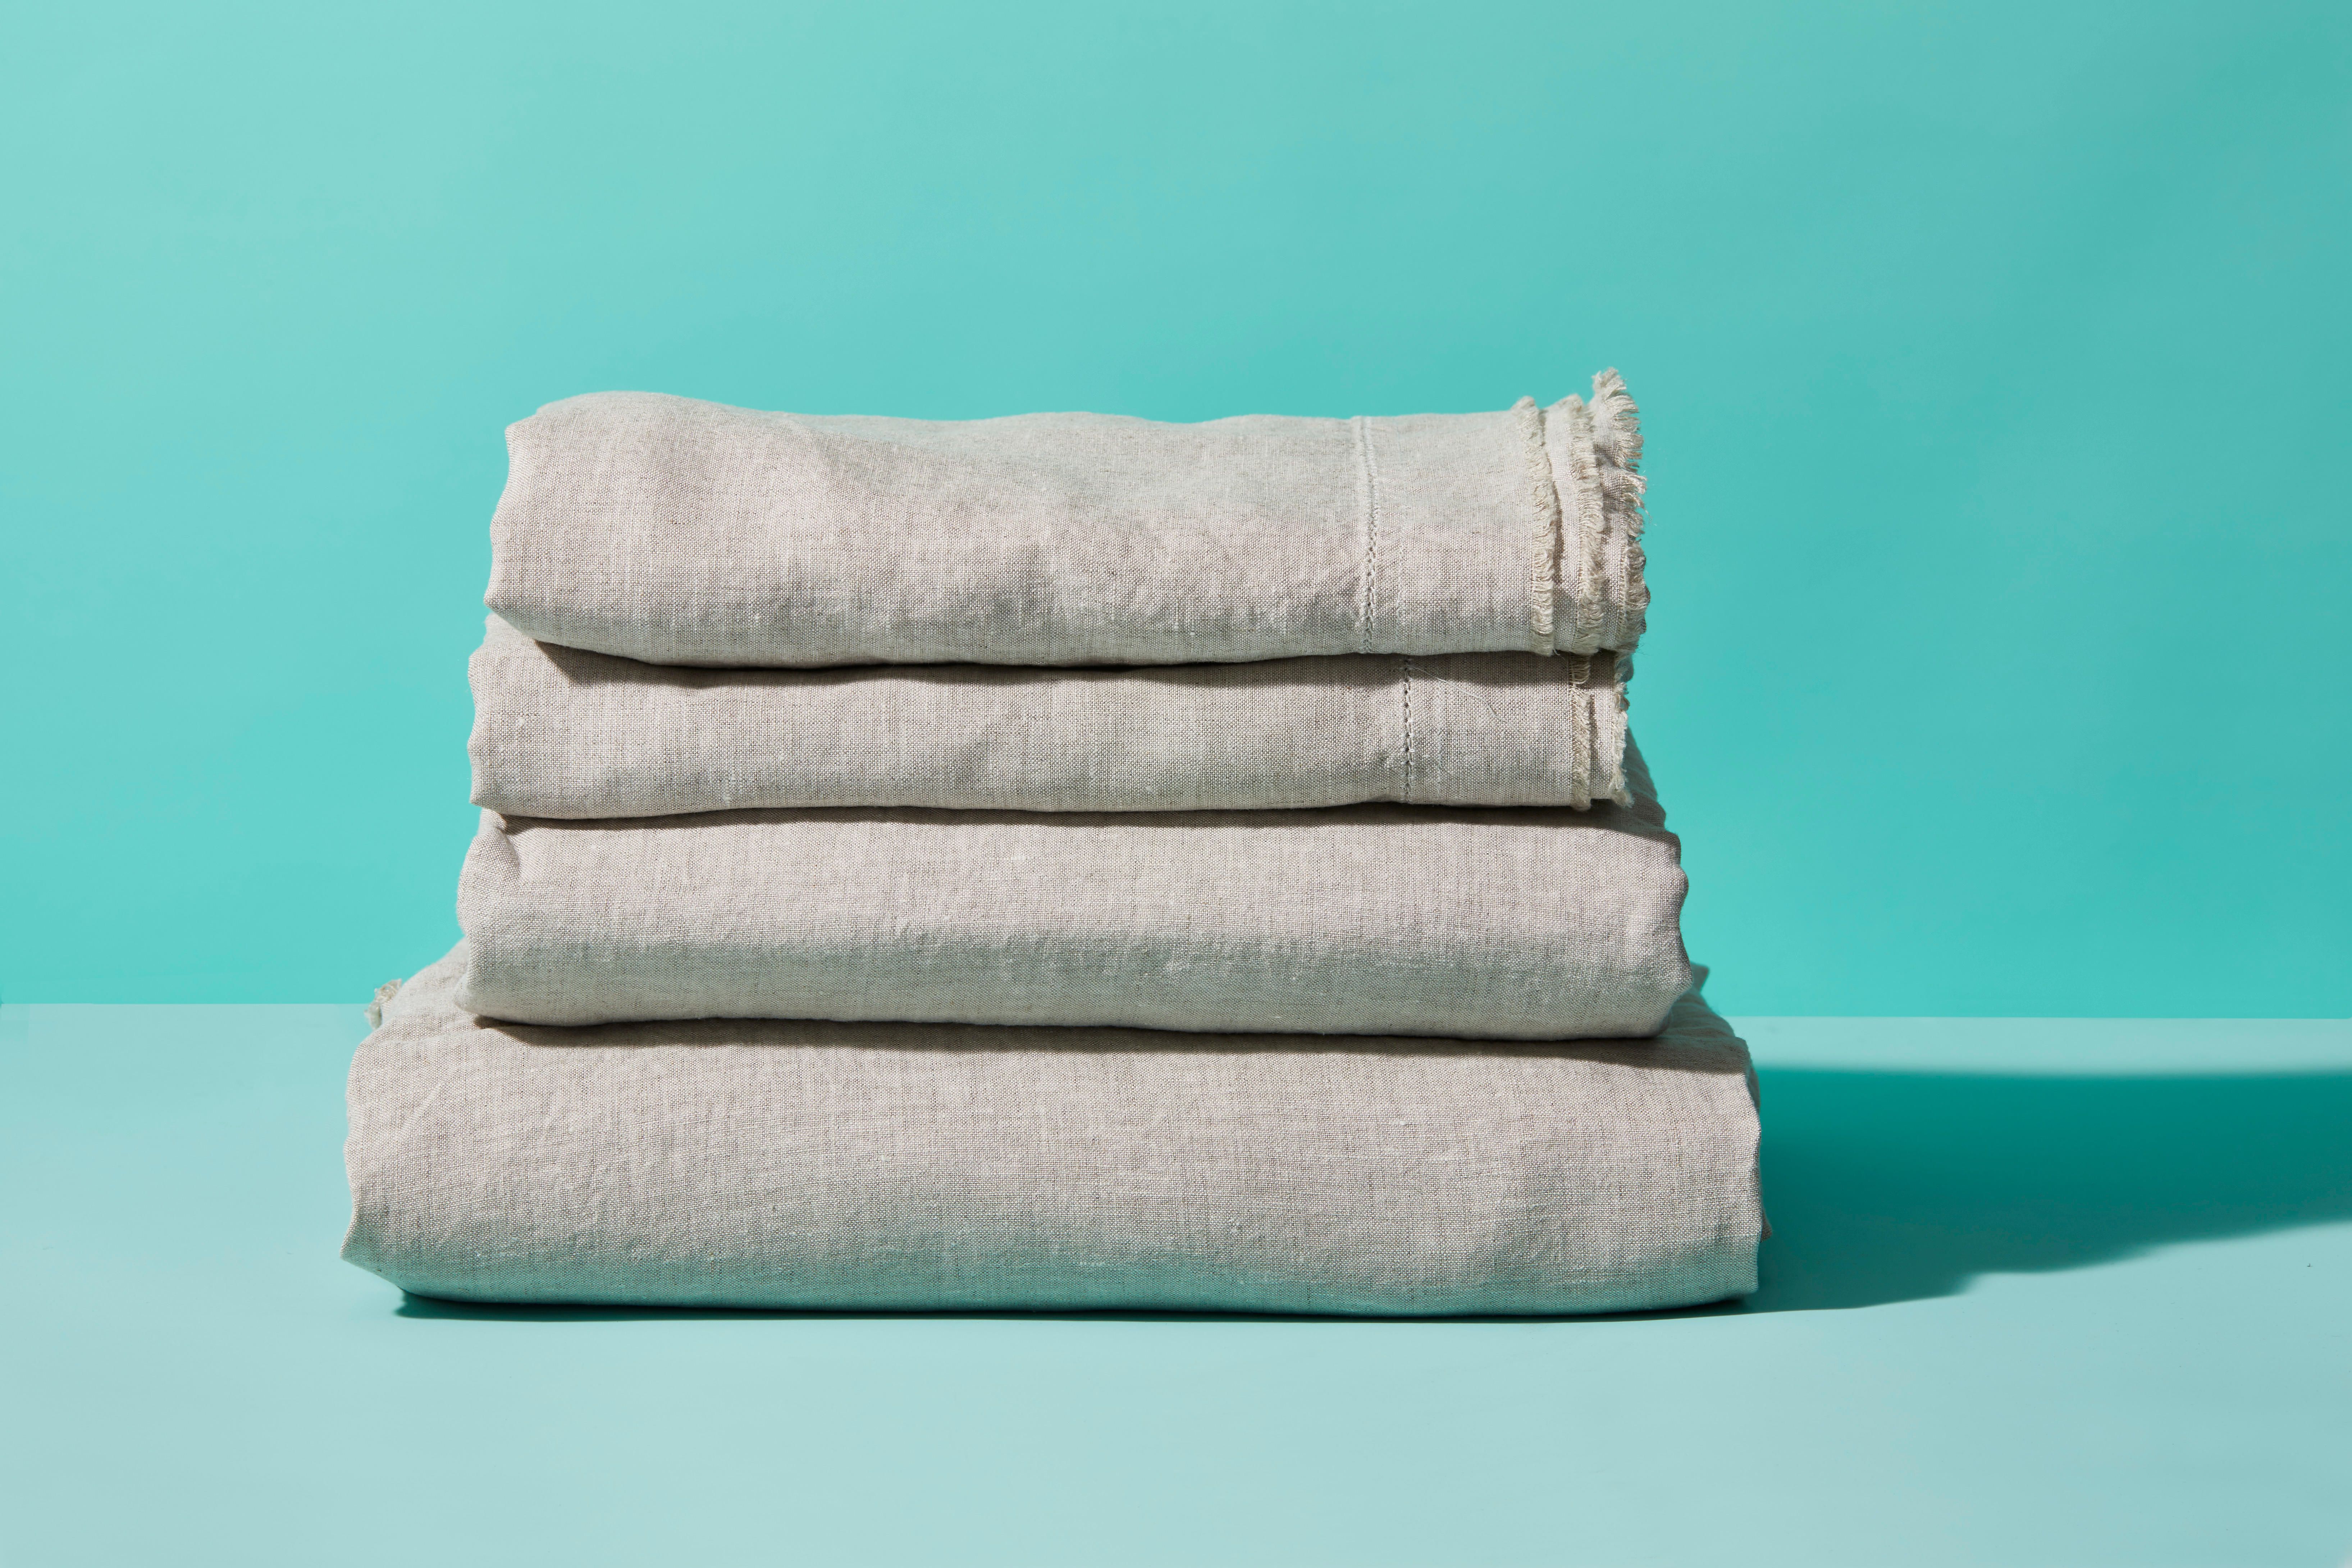 Best linen sheets of 2024, tested by editors